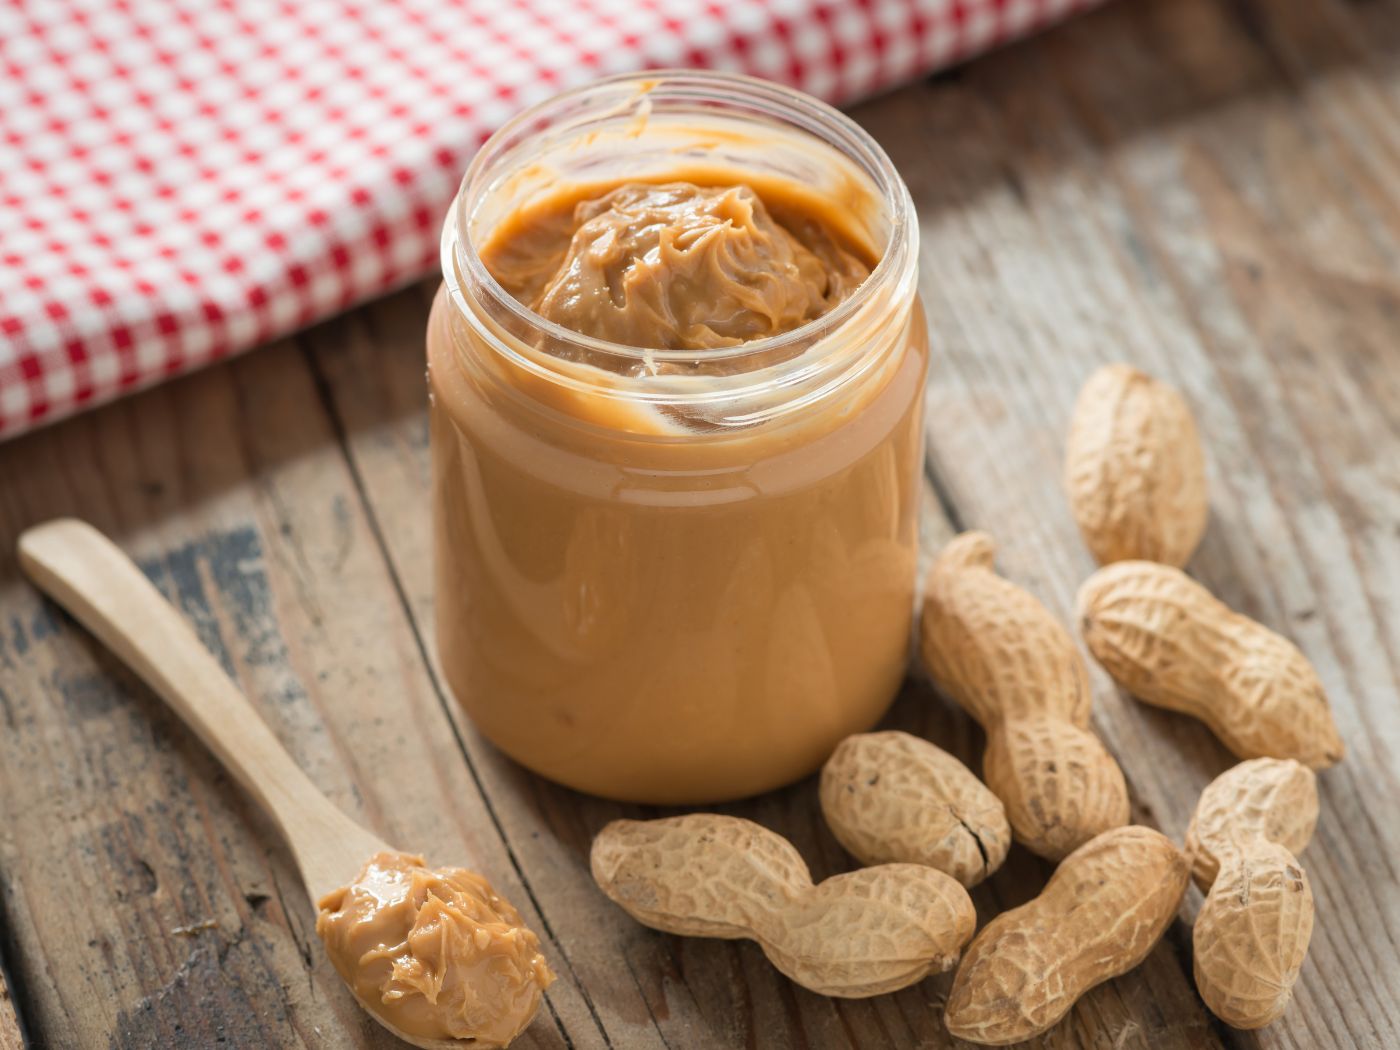 Health Benefits, Nutritional Value, and Side Effects of Peanut Butter